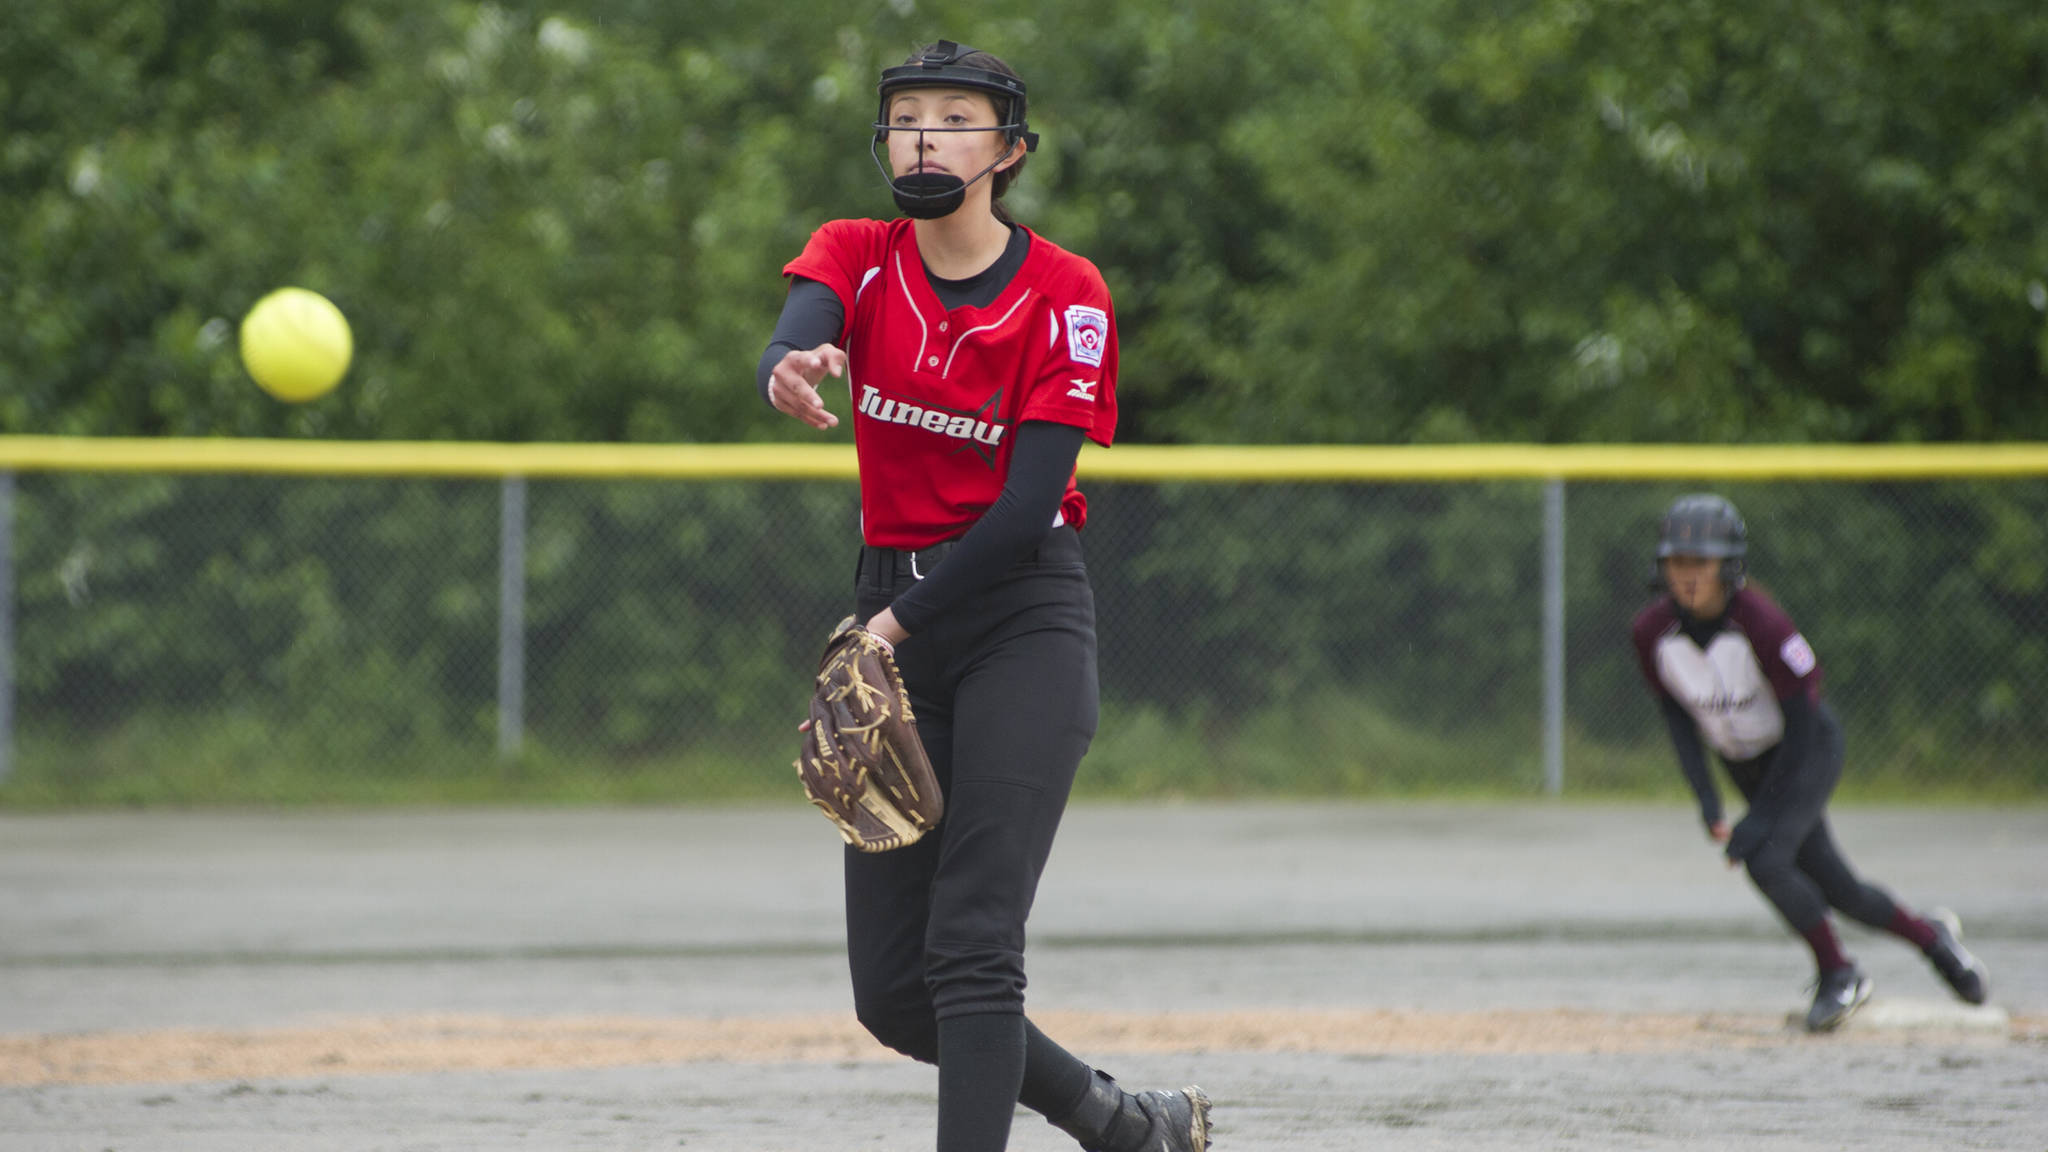 Gastineau Channel Little League’s Kiah Yadao pitches in the first inning of the Alaska District 2 Major Softball Championship Game against Ketchikan Little League on Tuesday at Melvin Park. (Nolin Ainsworth | Juneau Empire)